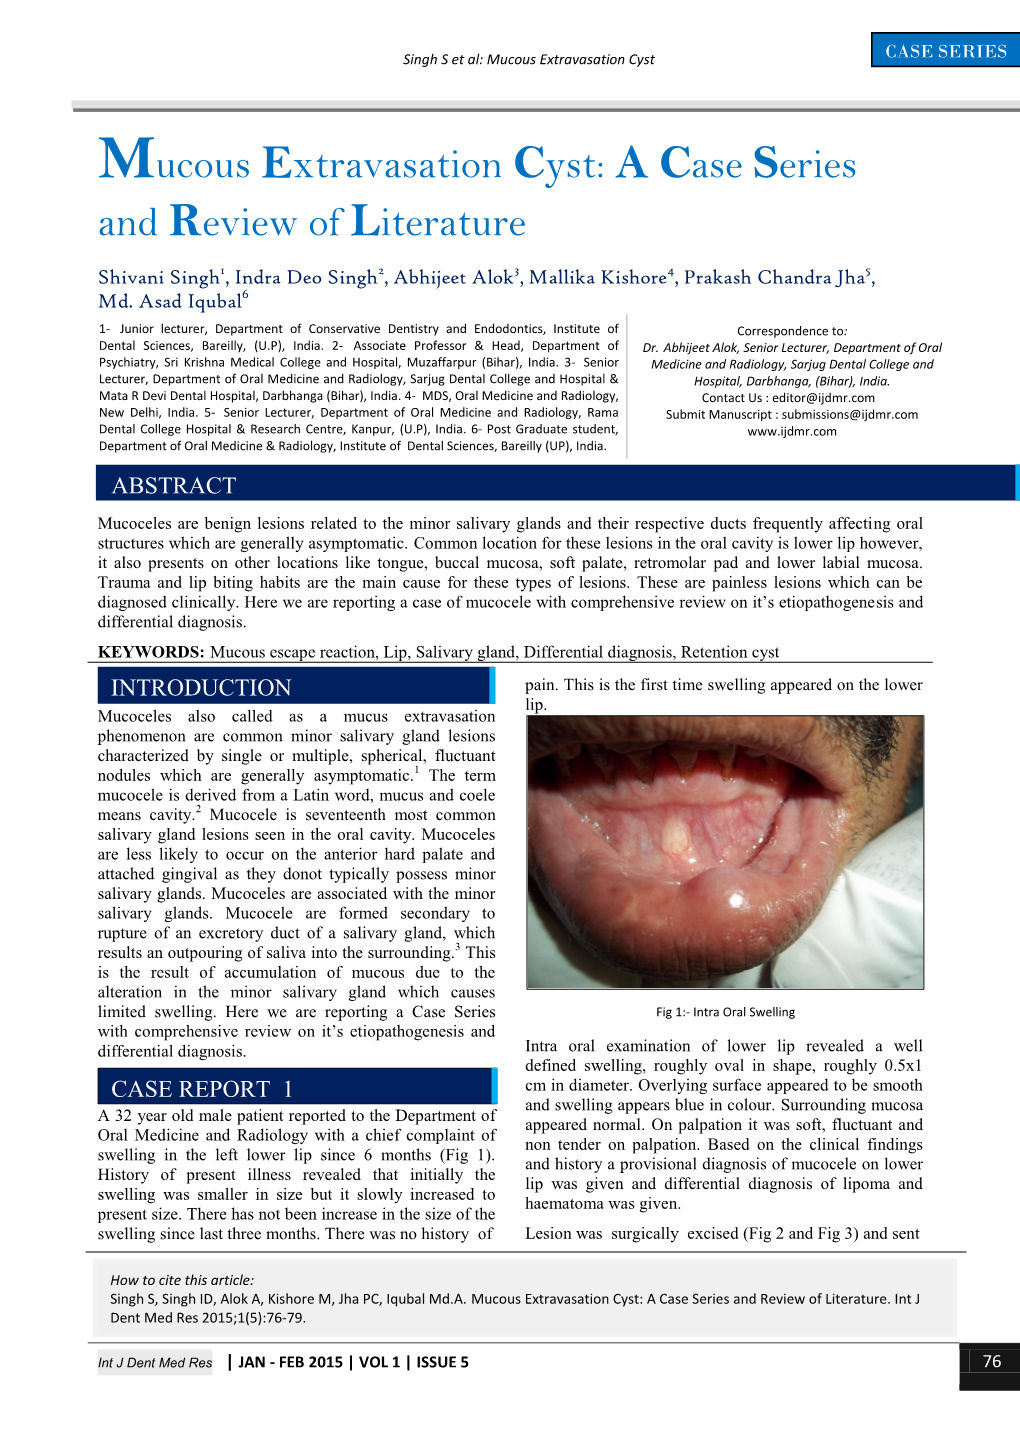 Mucous Extravasation Cyst: a Case Series and Review of Literature